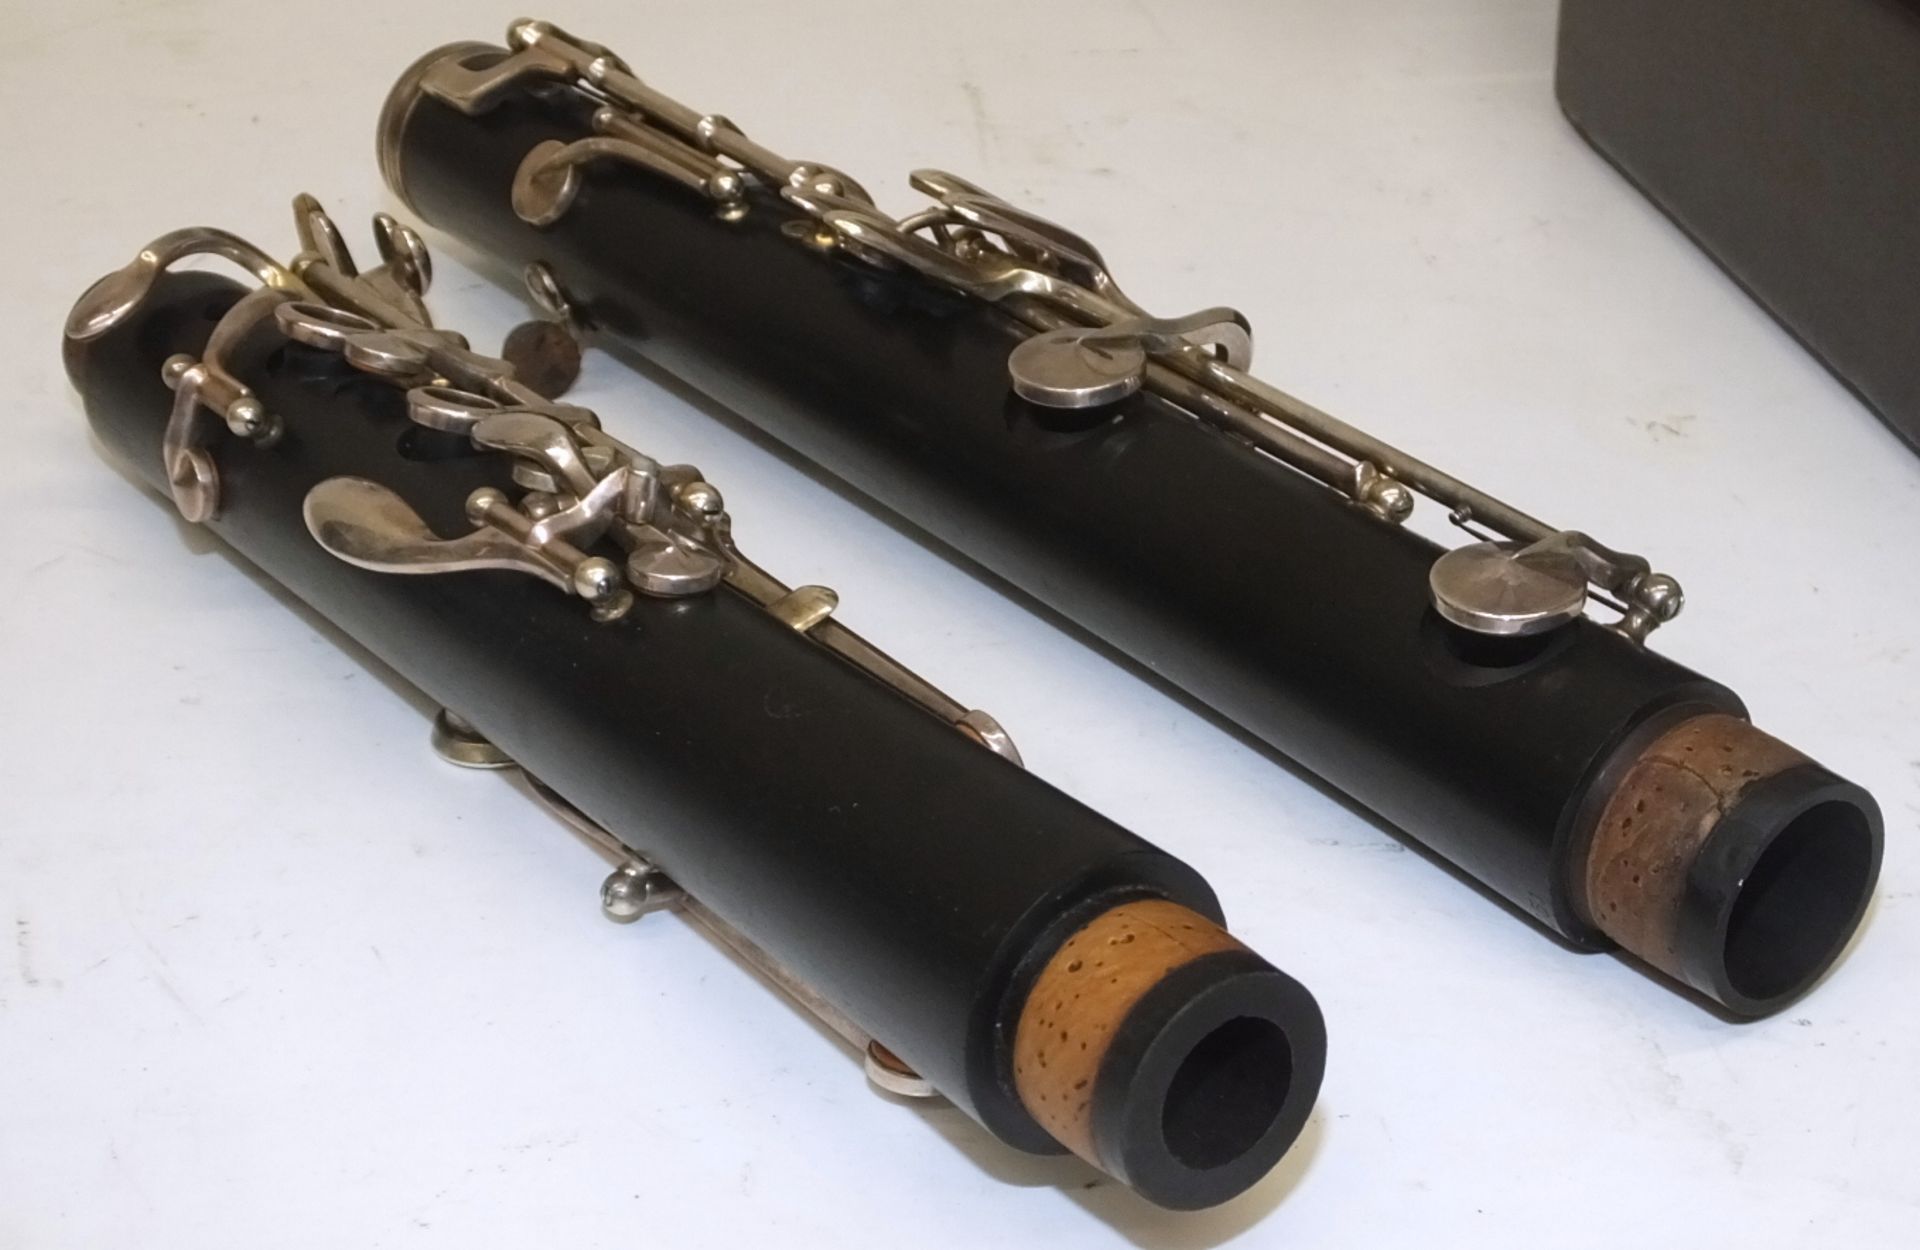 Buffet Crampon Clarinet (A) - Serial Number - 296051 - Image 5 of 11